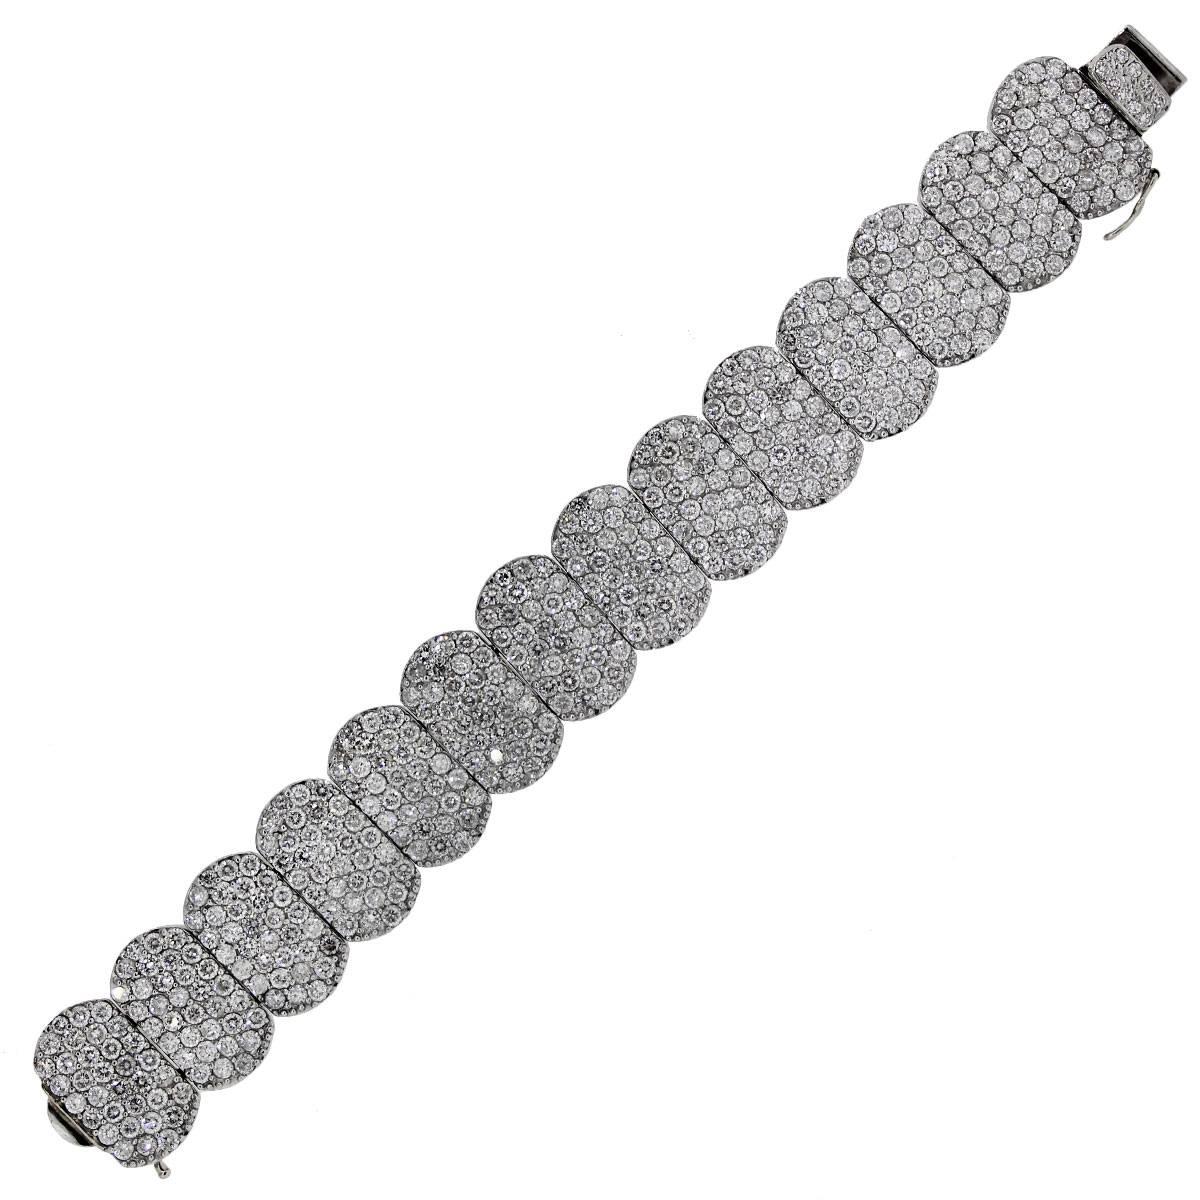 Material: Platinum
Diamond Details: Approximately 33.65ctw round brilliant diamonds. Diamonds are G/H in color and VS in clarity.
Clasp: Tongue in box clasp with safety latch
Measurements: 7″ x 0.19″ x 0.87″
Total Weight: 104.5g (67.3dwt)
Style #: